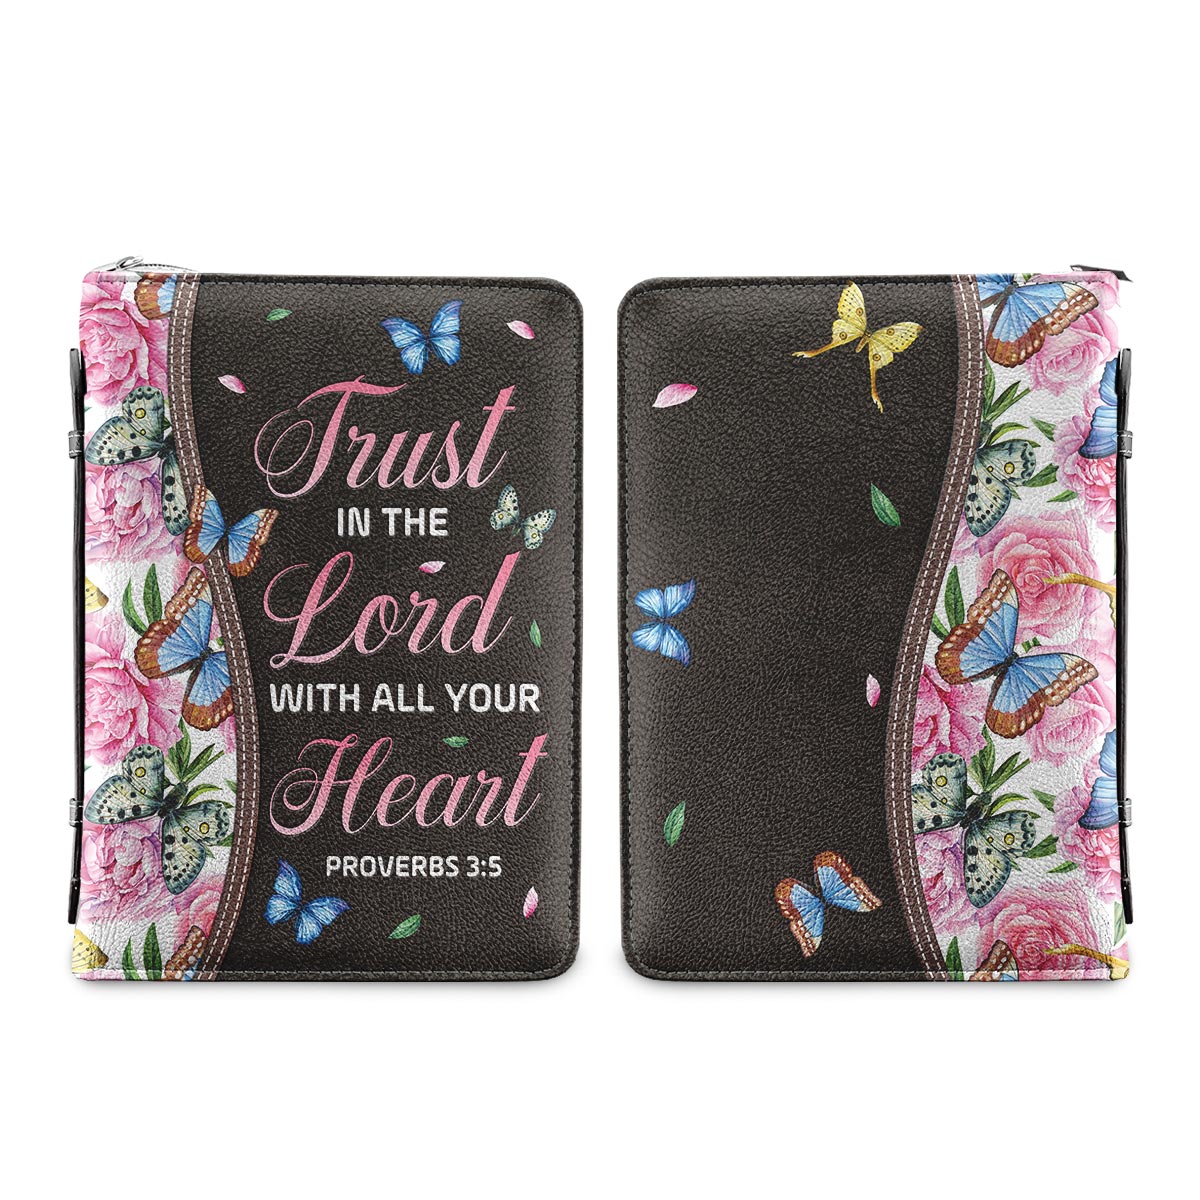 Trust In The Lord Proverbs 3 5 Butterfly Pattern Personalized Bible Cover - Christian Bible Covers For Women